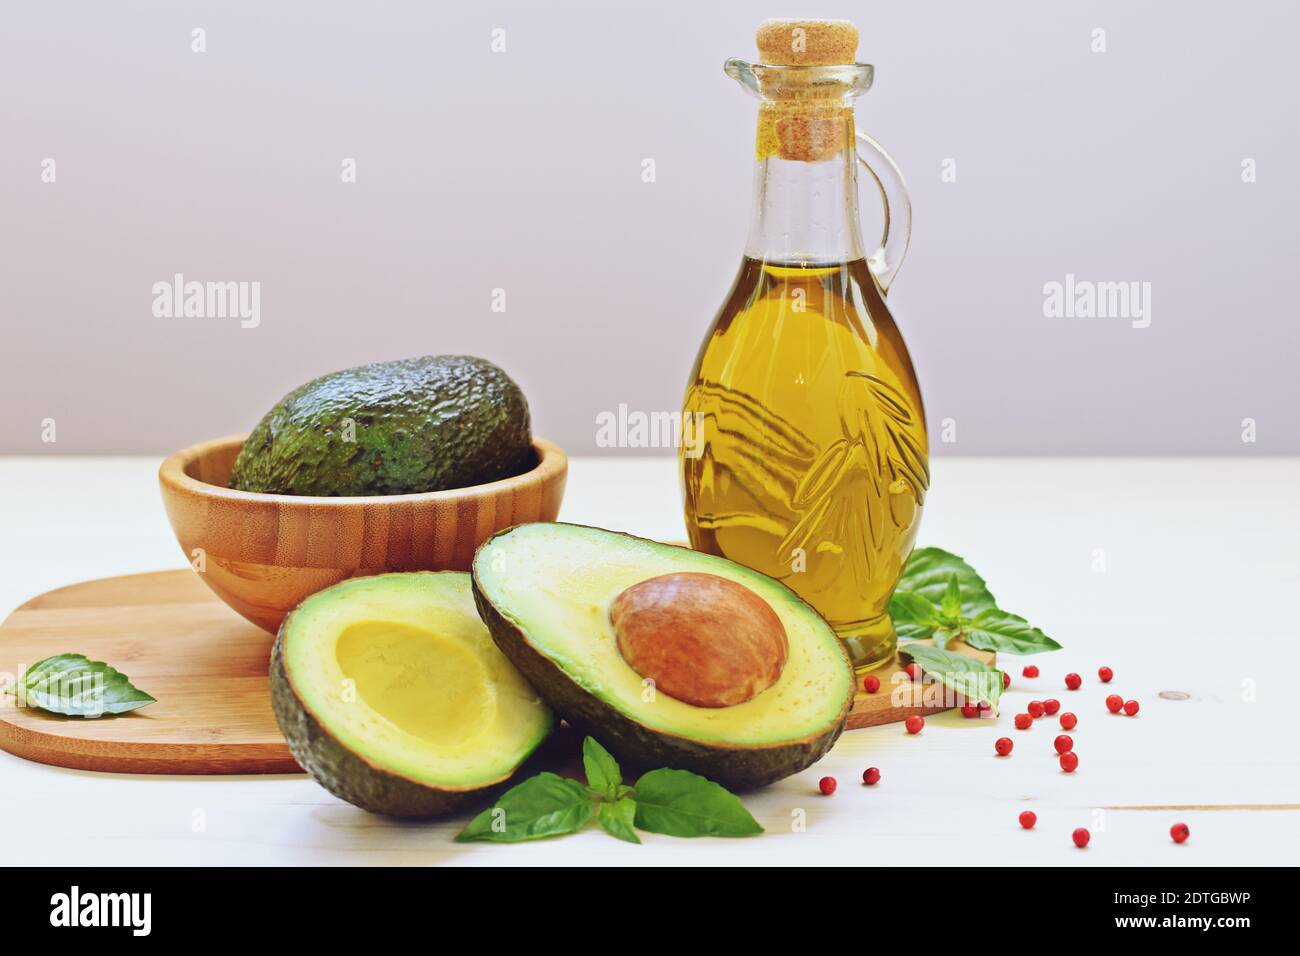 Concept of vegetarian food with avocado and olive oil on white background. Stock Photo